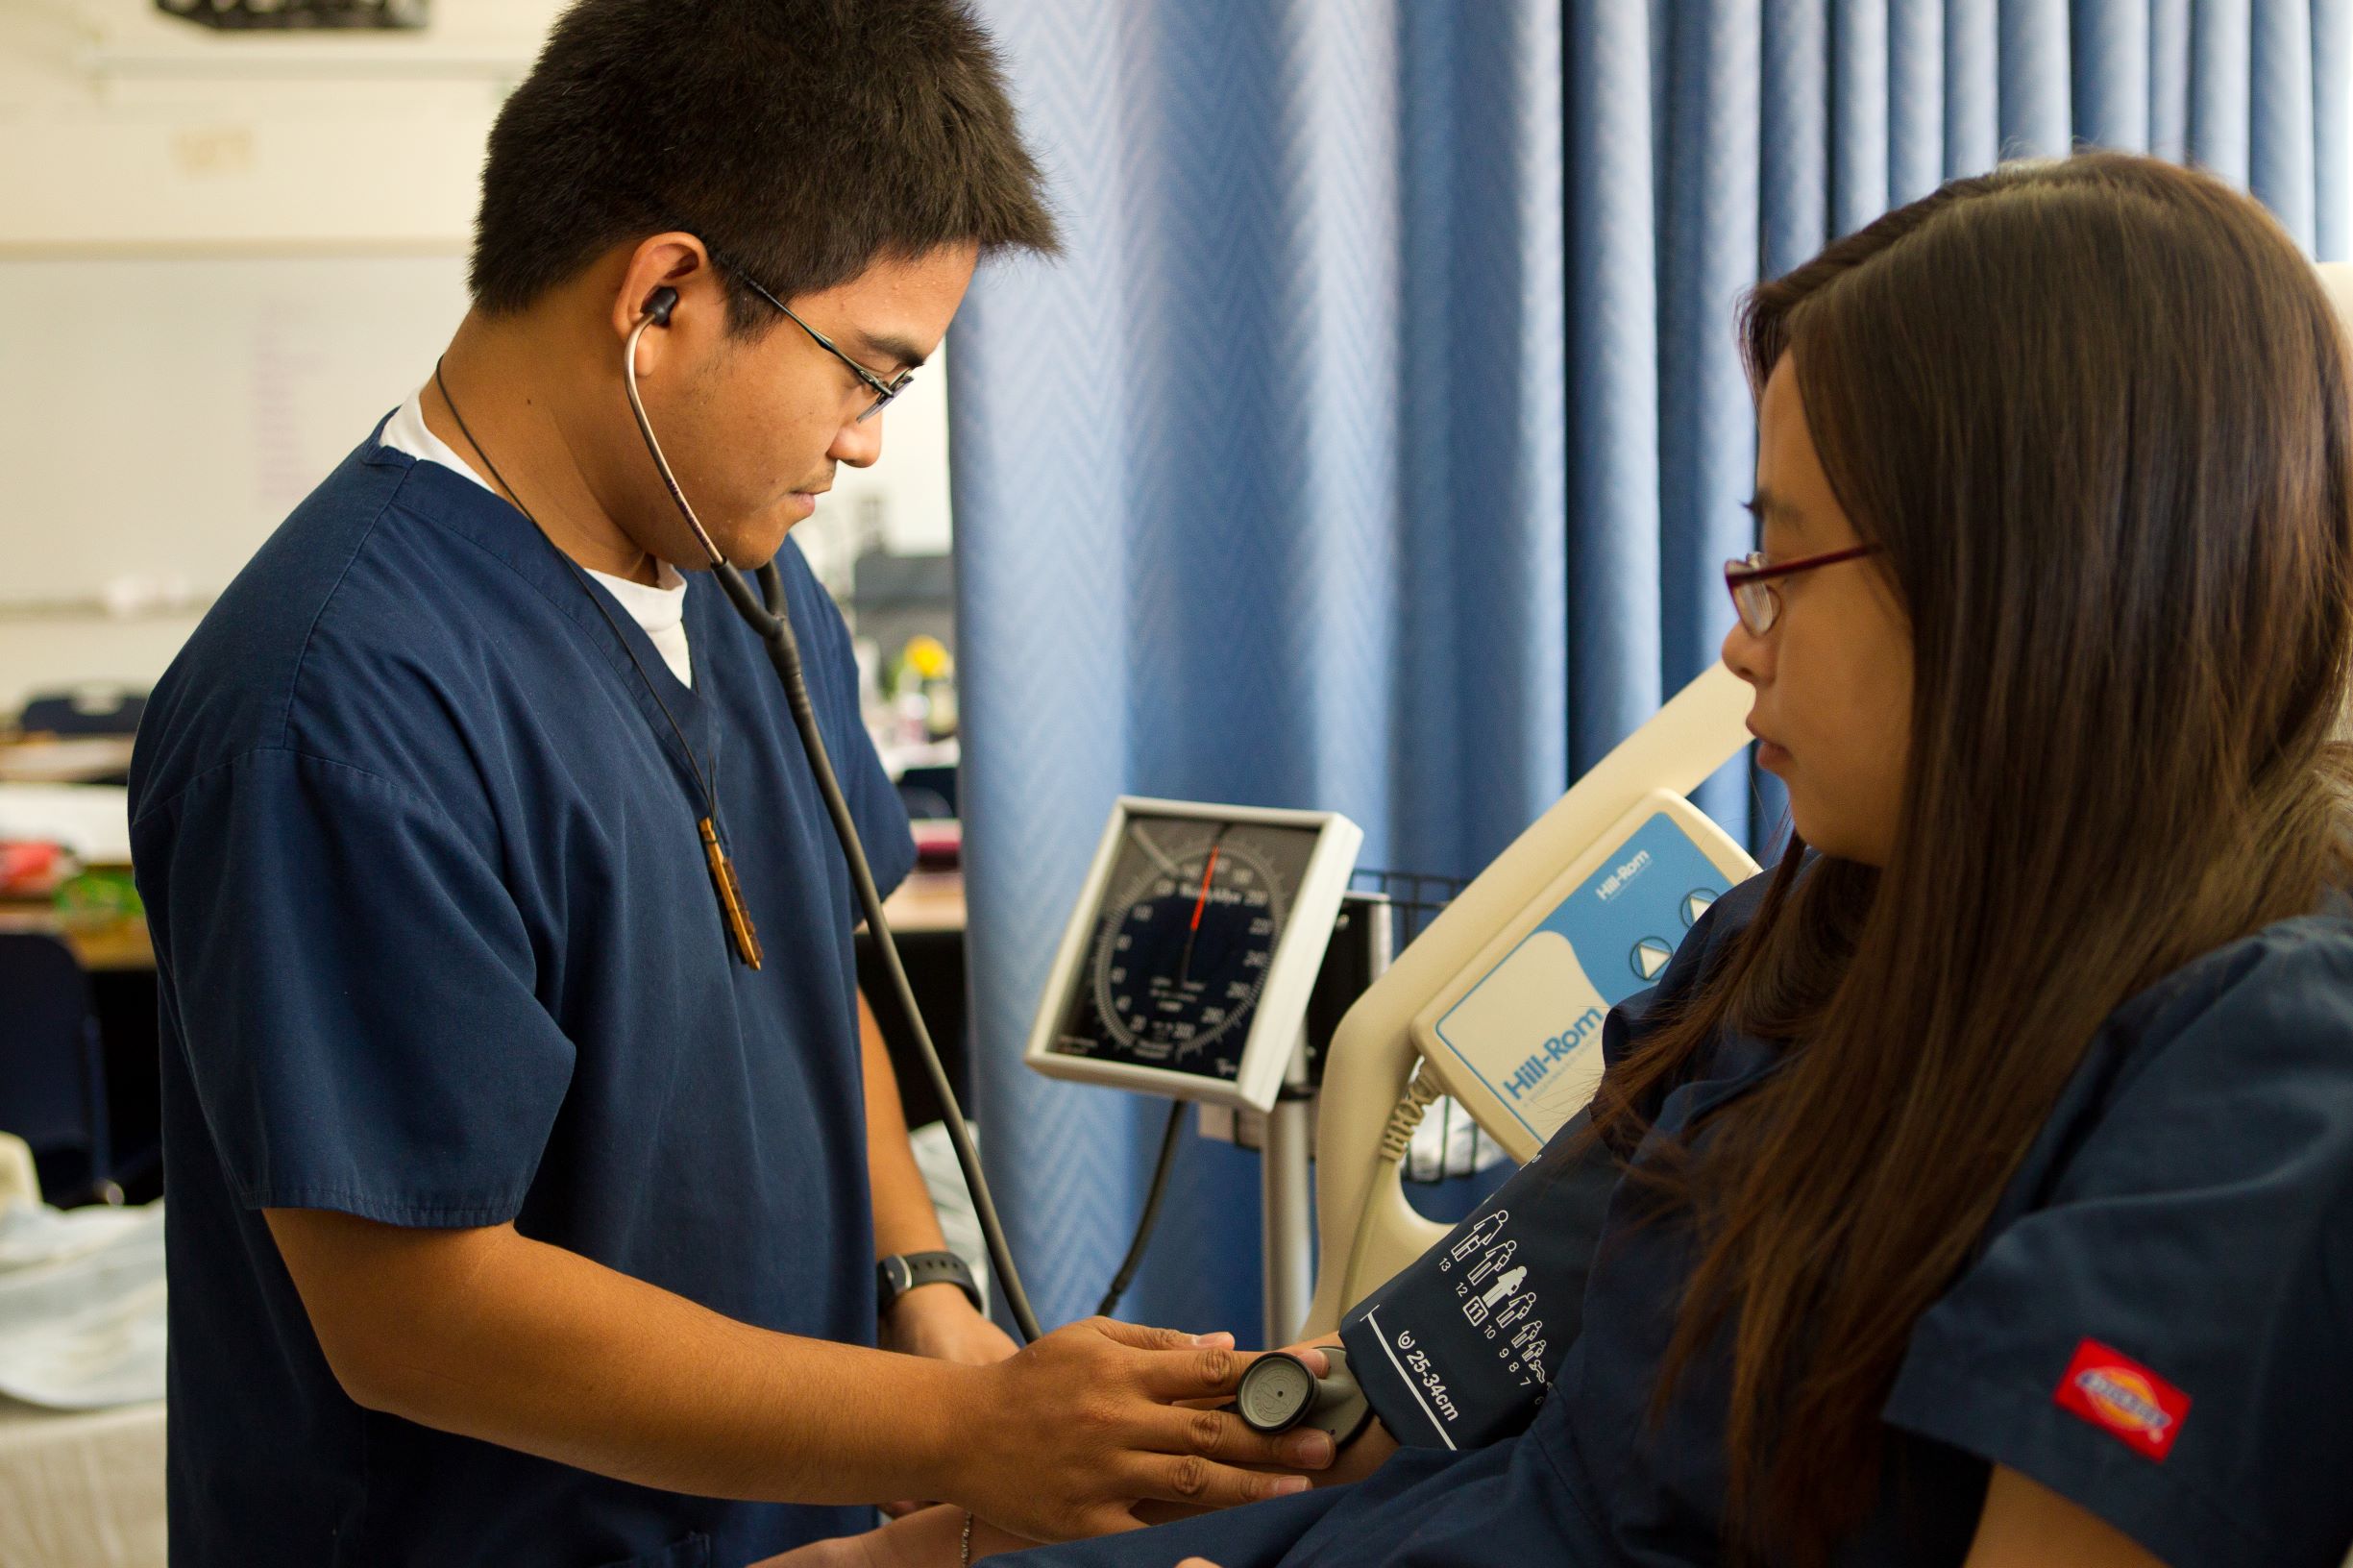 A nursing student takes another nursing student's blood pressure.